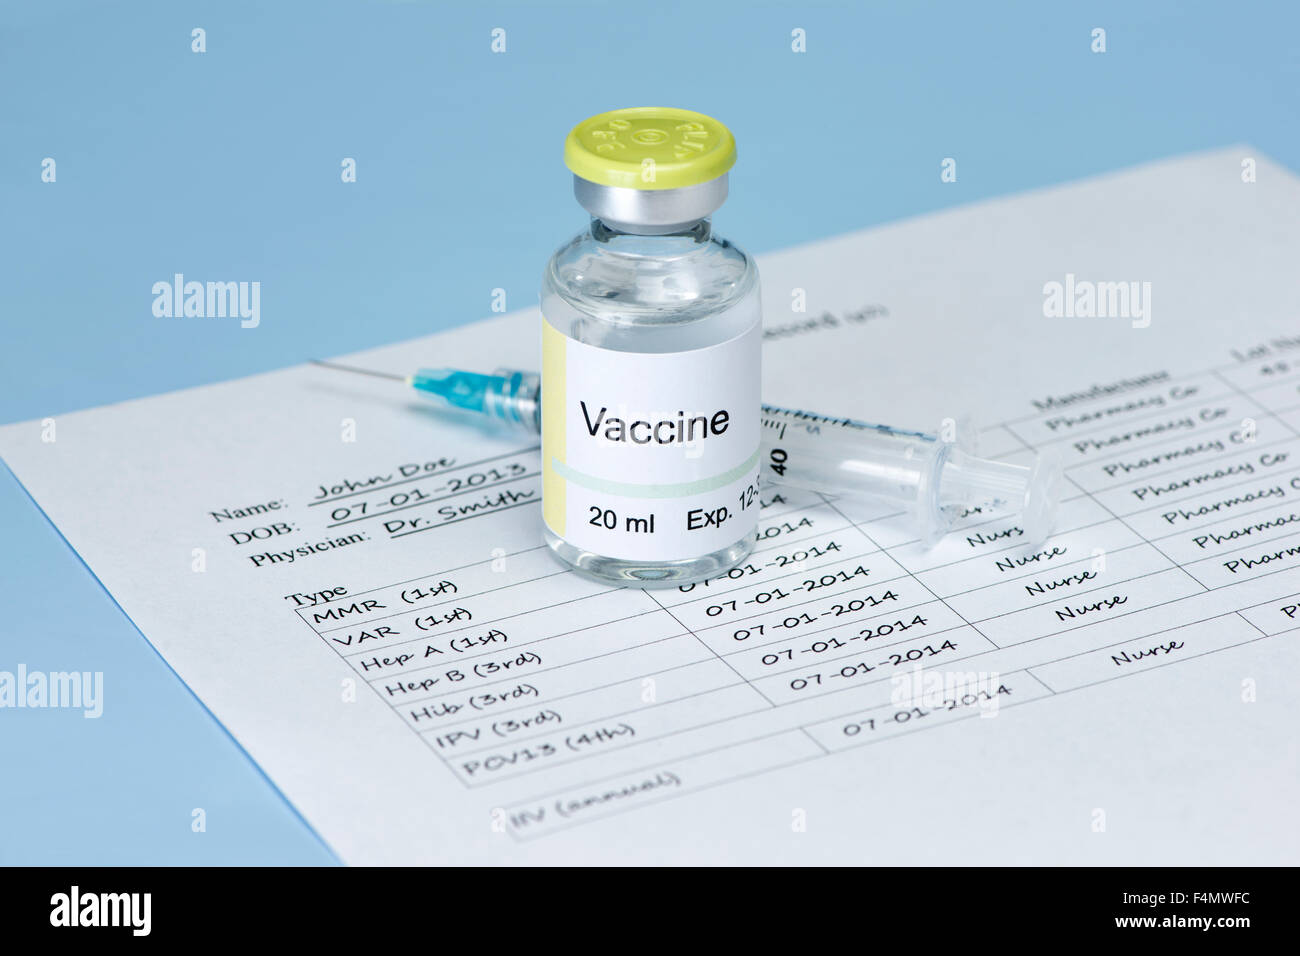 Vaccine vial with immunization record and syringe on white background. Label and record are fictitious, and any resemblance to a Stock Photo